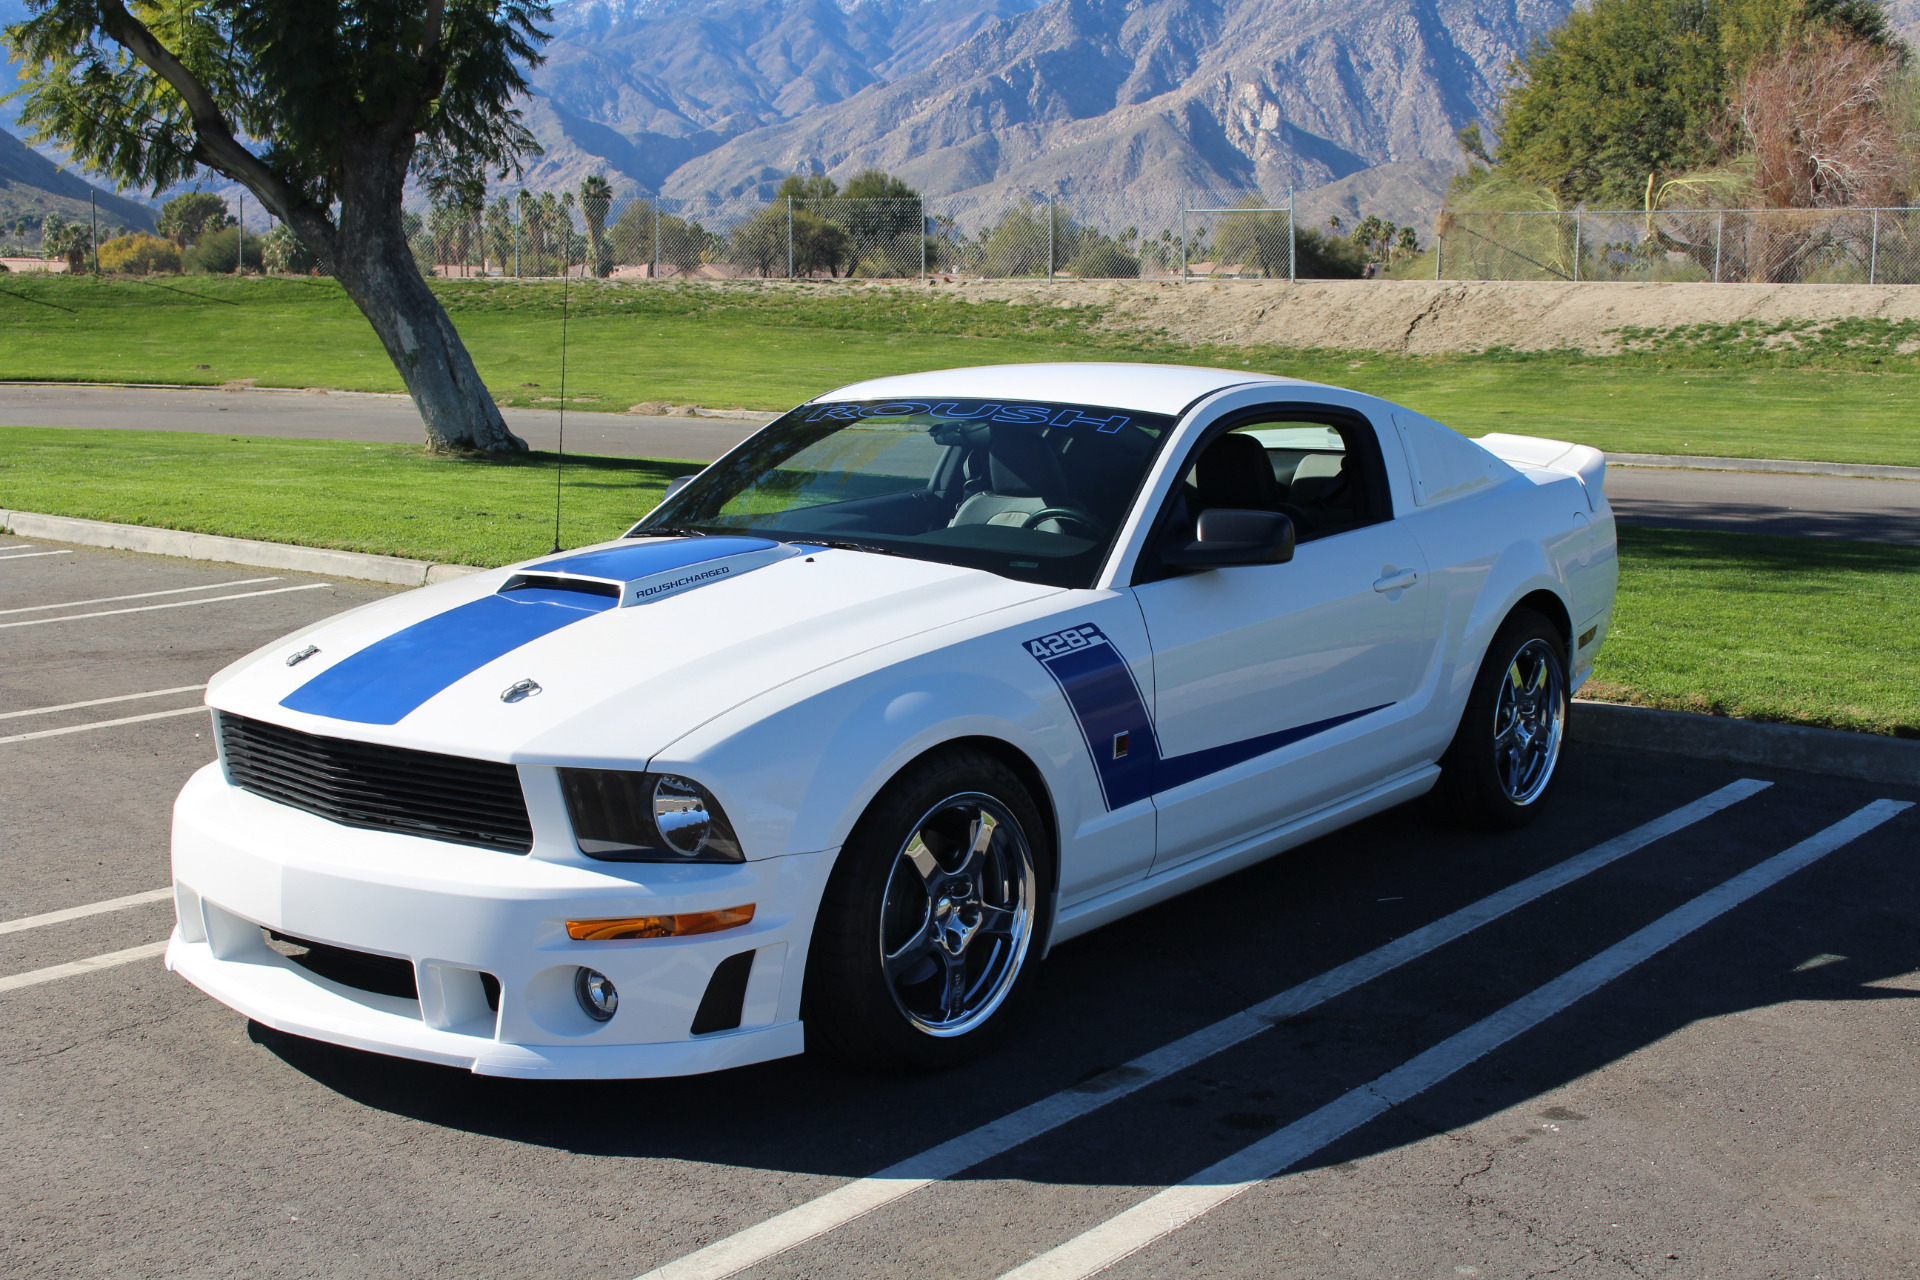 Mustang Of The Day: 2008 ROUSH 428R Mustang